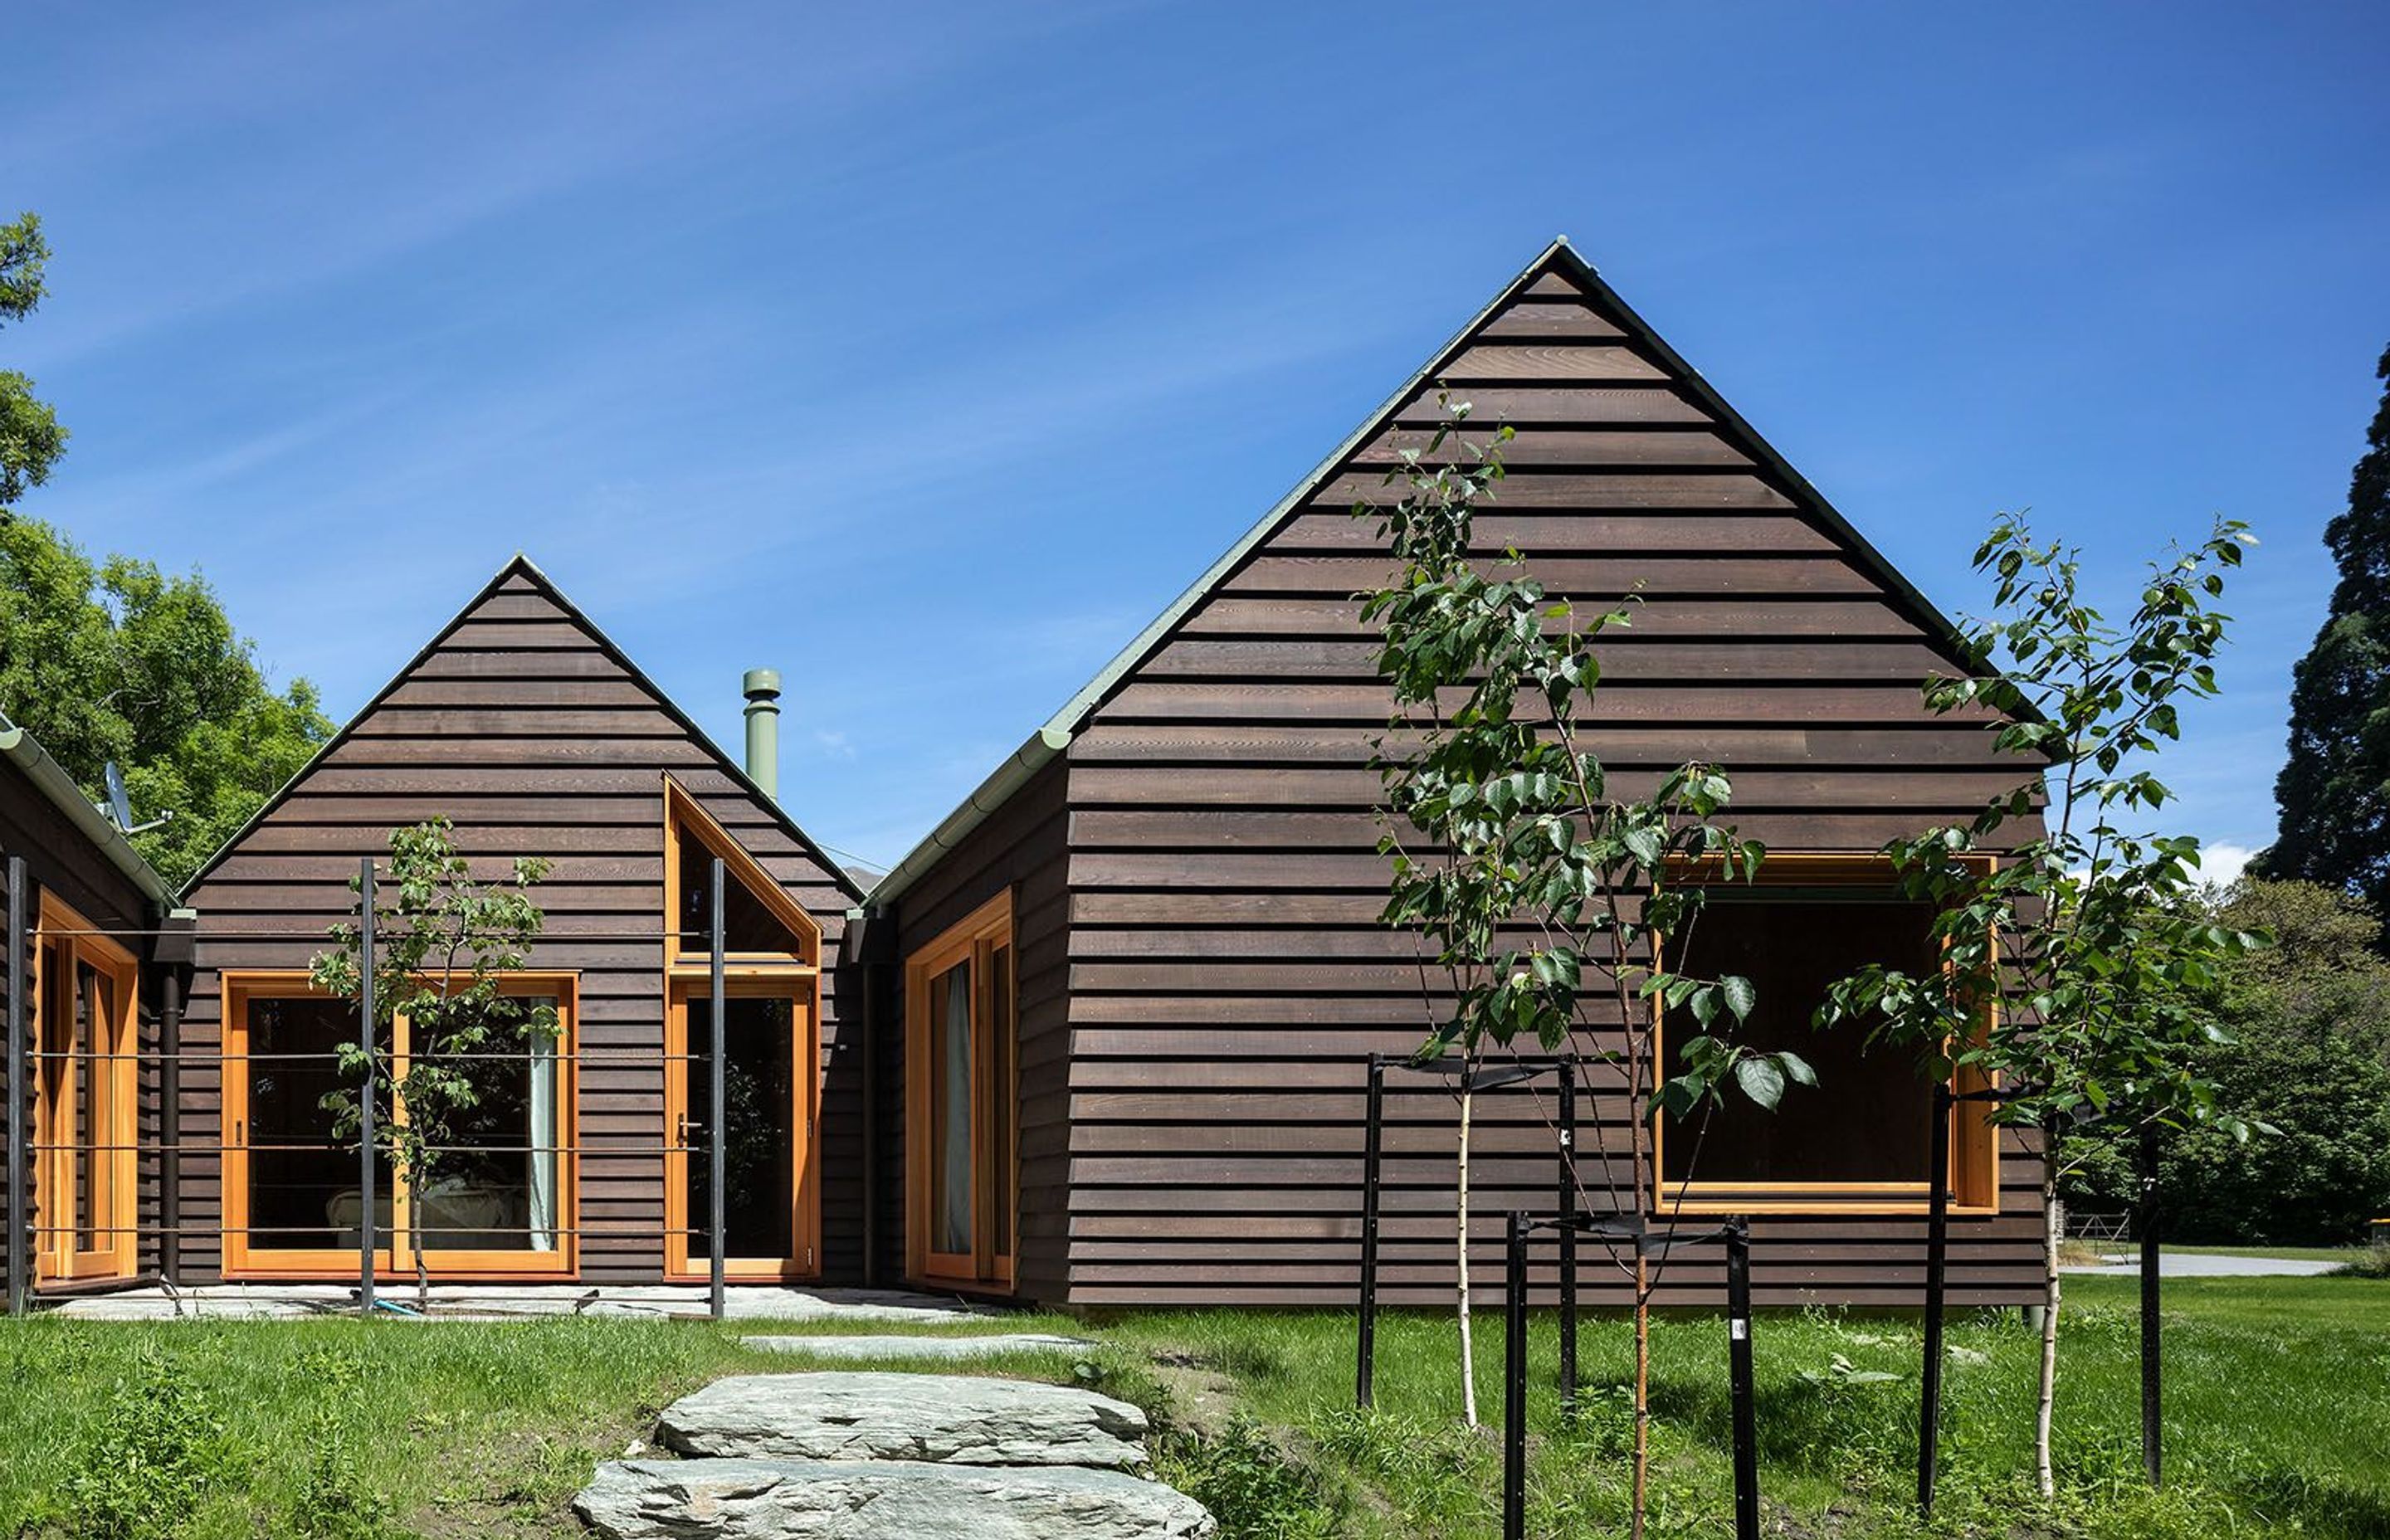 Rosenfeld Kidson’s Bevel Back Cedar weatherboards provide a classic design element to any external cladding system.